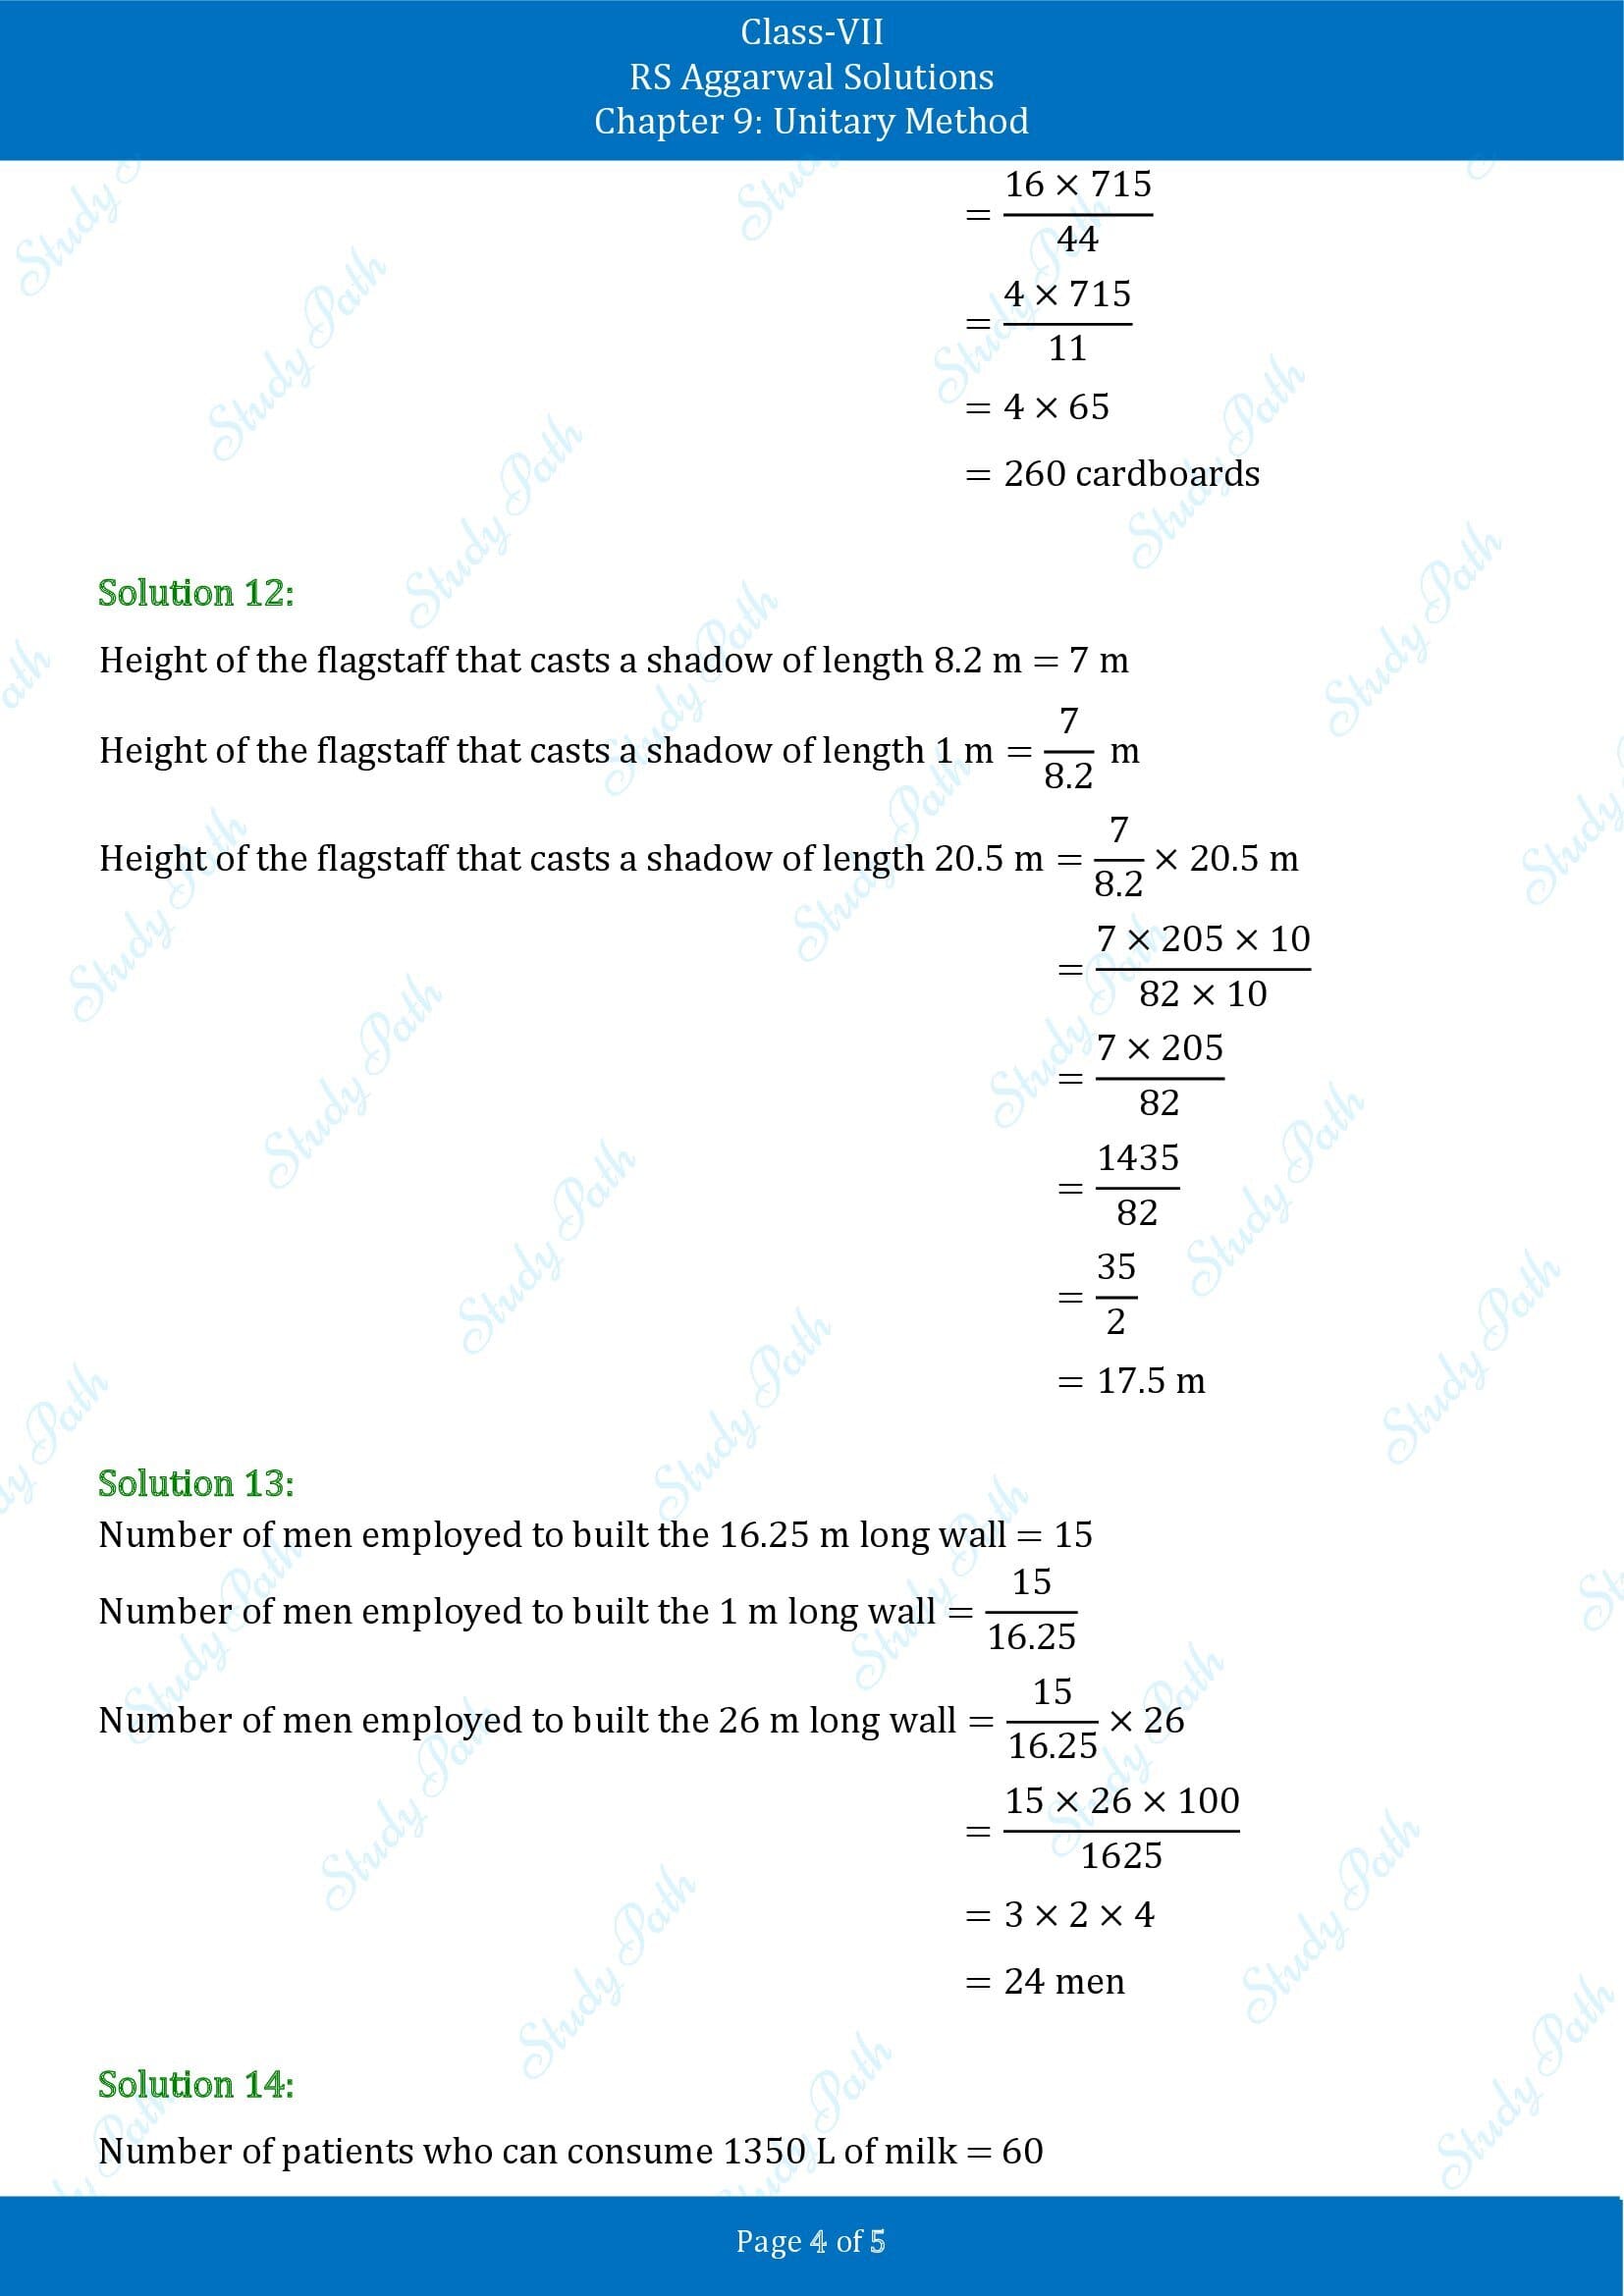 RS Aggarwal Solutions Class 7 Chapter 9 Unitary Method Exercise 9A 00004